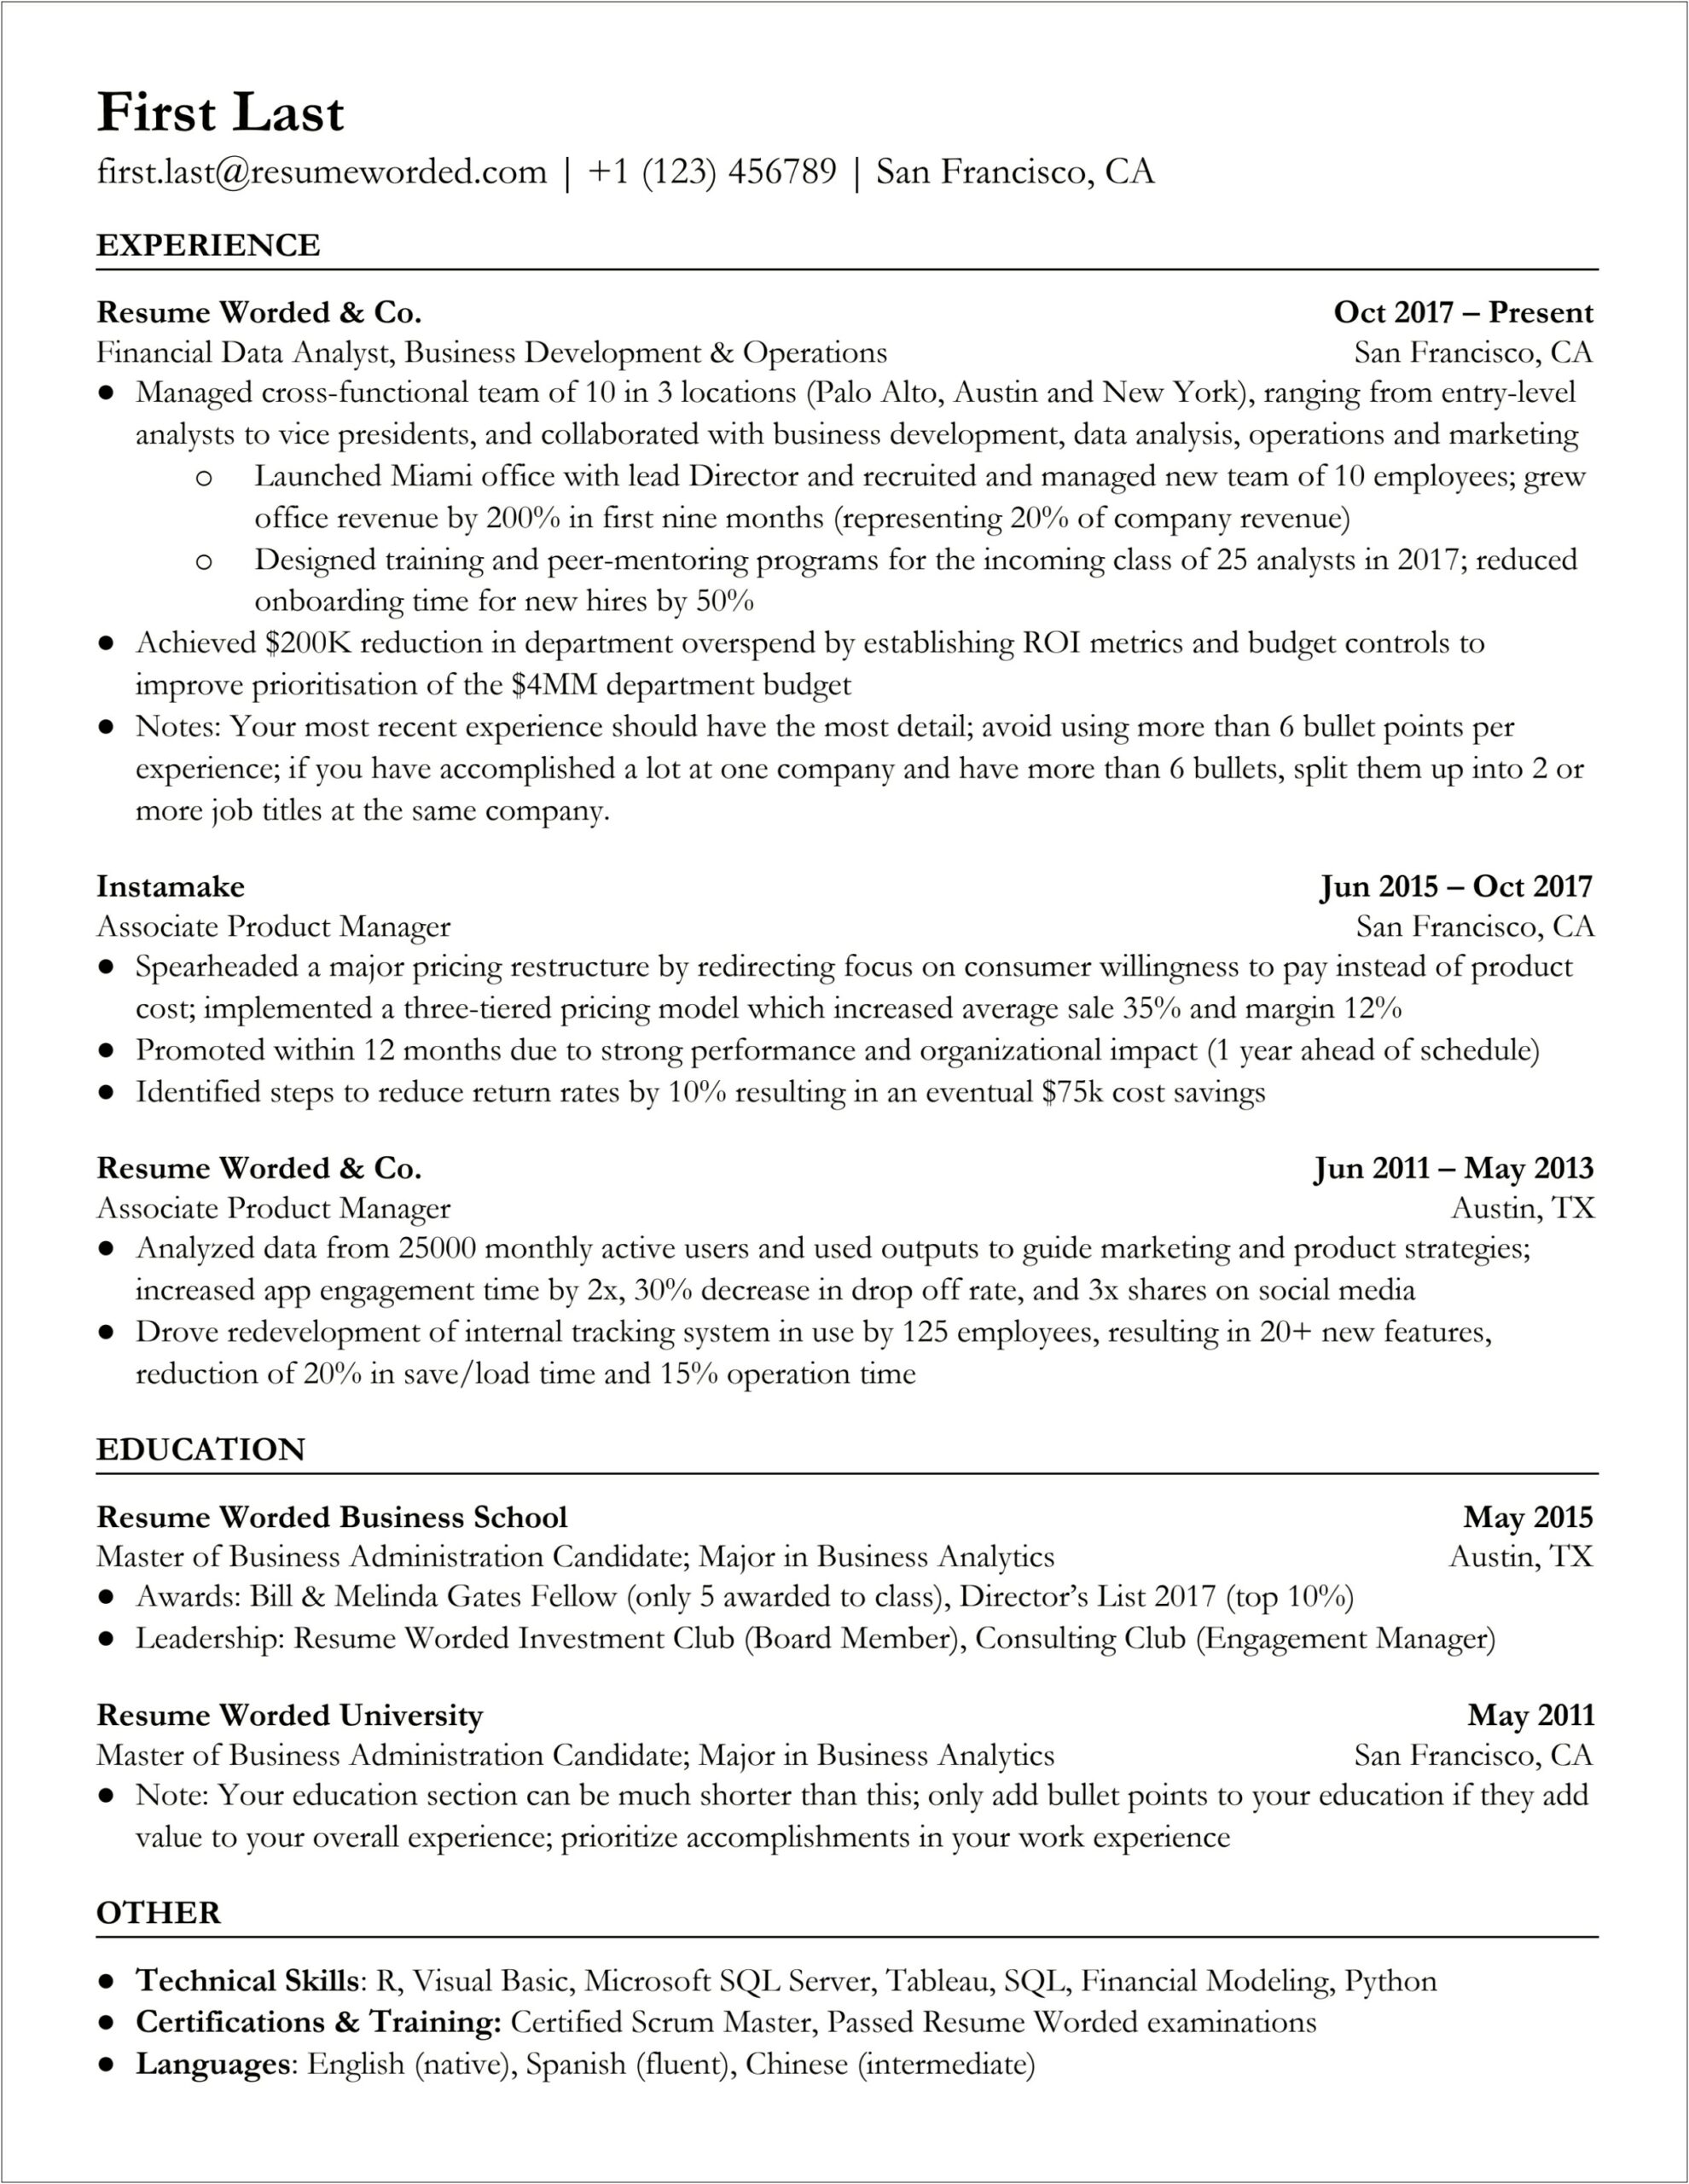 Working In Chinese Media Resume Value